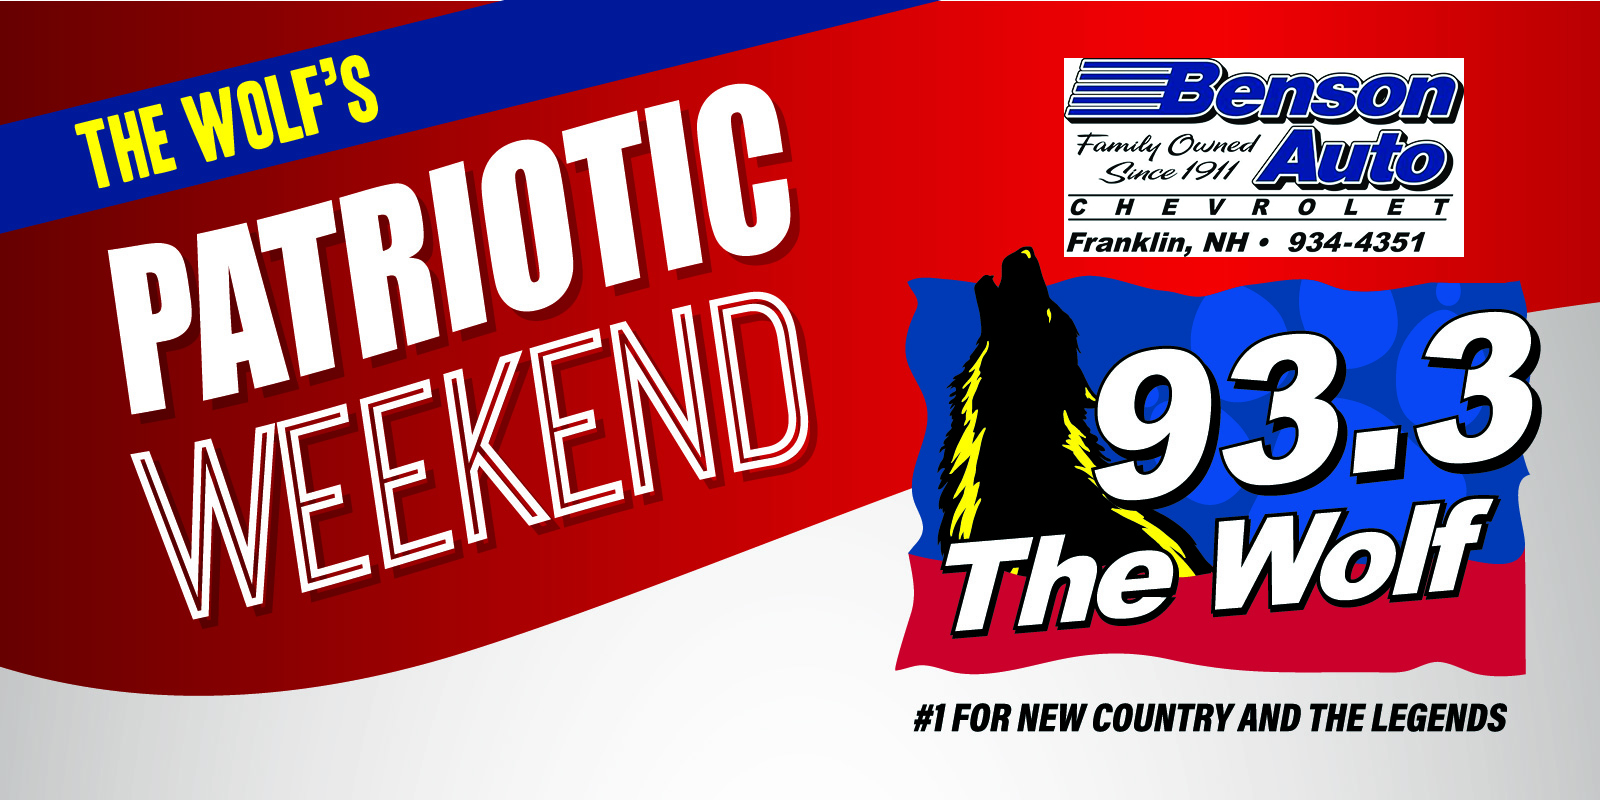 The Wolf’s Patriotic Weekend – Songs to Salute Our Troops